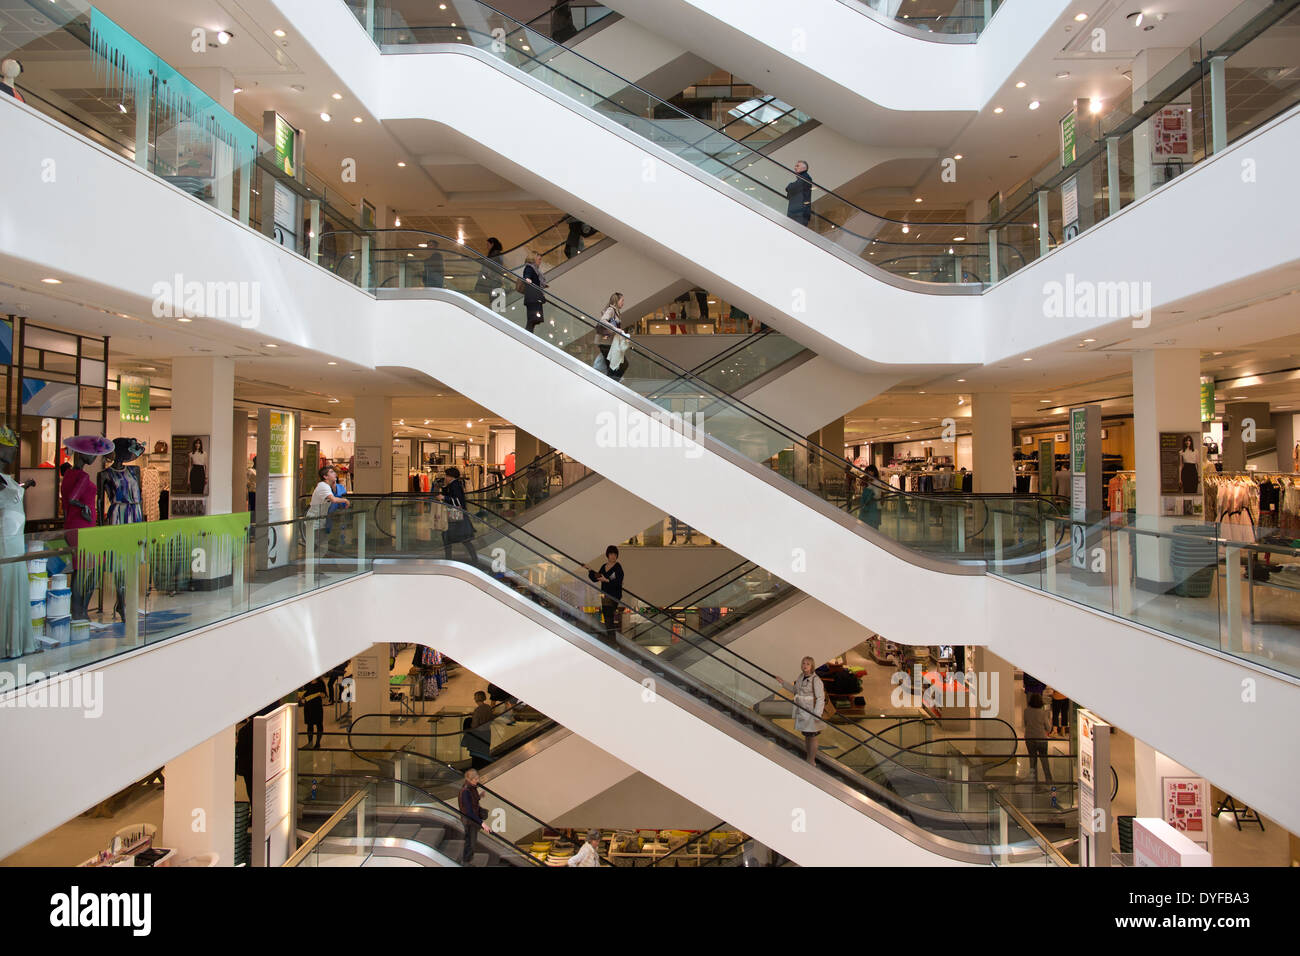 The main escalators in Peter Jones department store owned by John Lewis Partnership, located in Sloane Square, Chelsea London UK Stock Photo